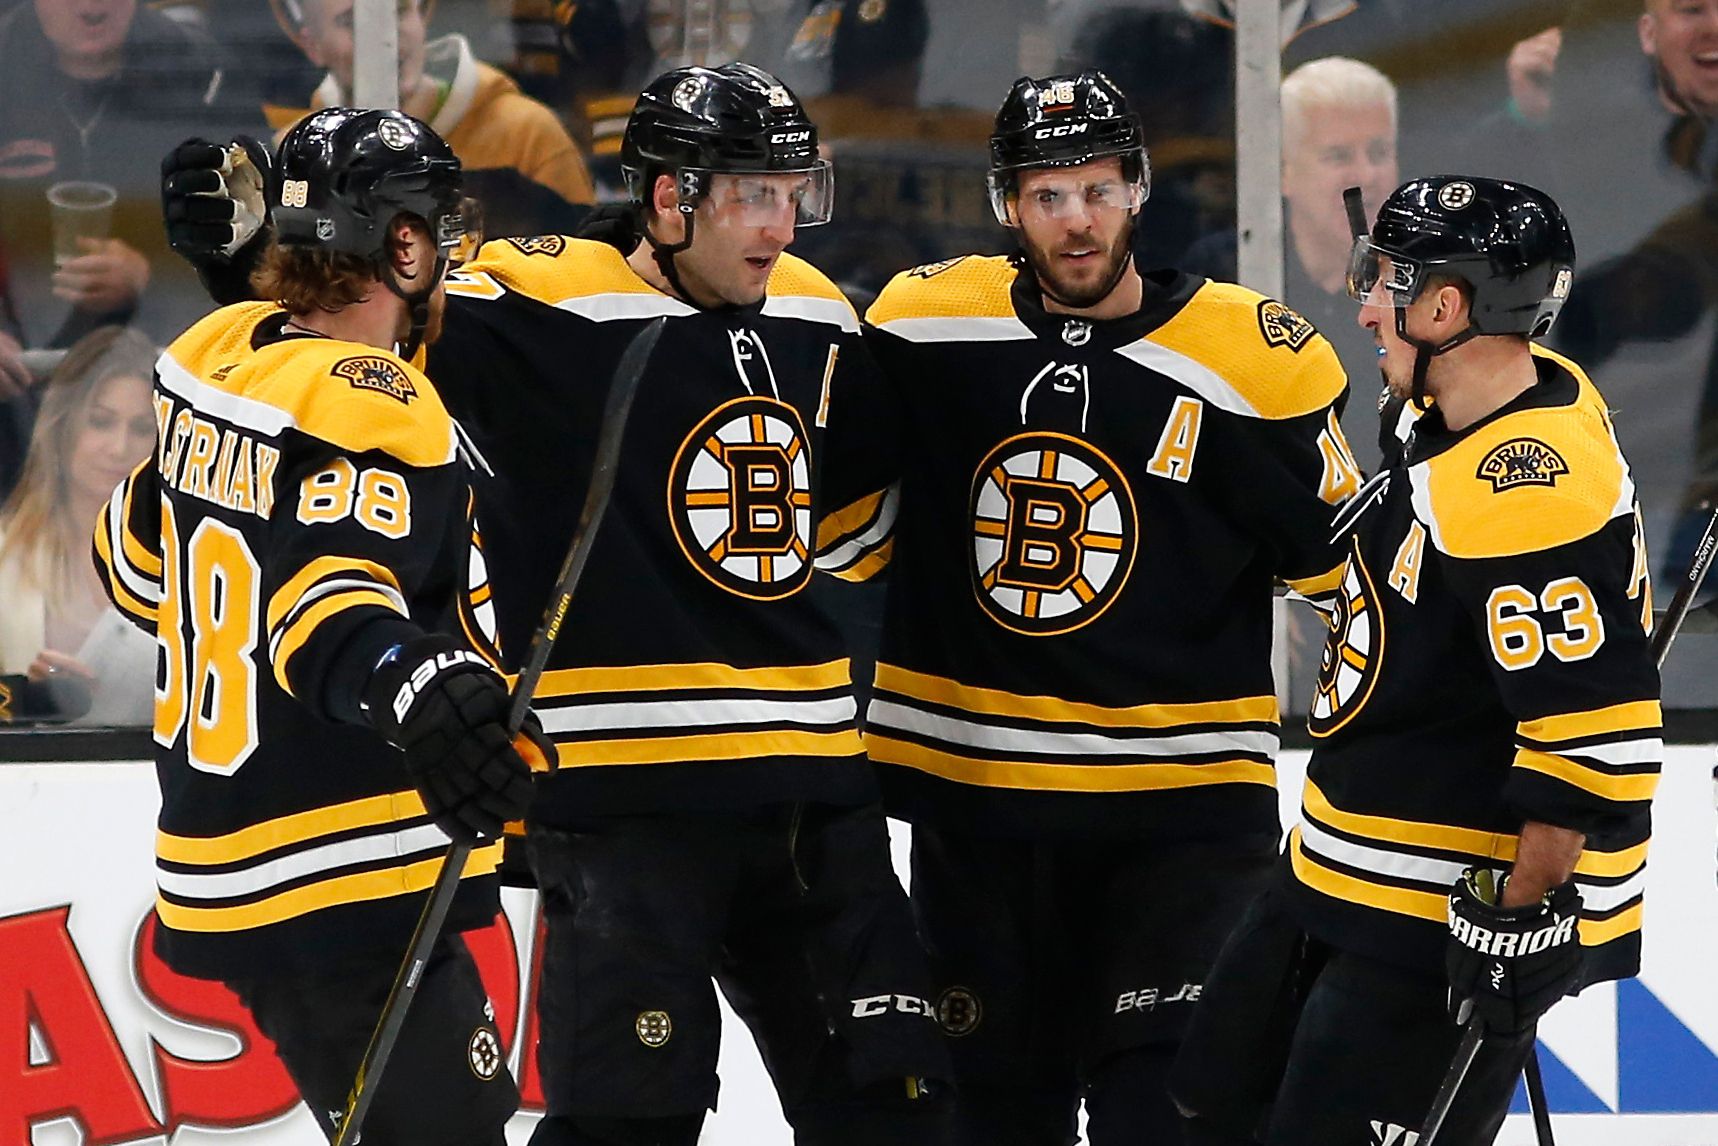 Bruins' Pastrnak leads way as young stars shine in NHL All-Star 3